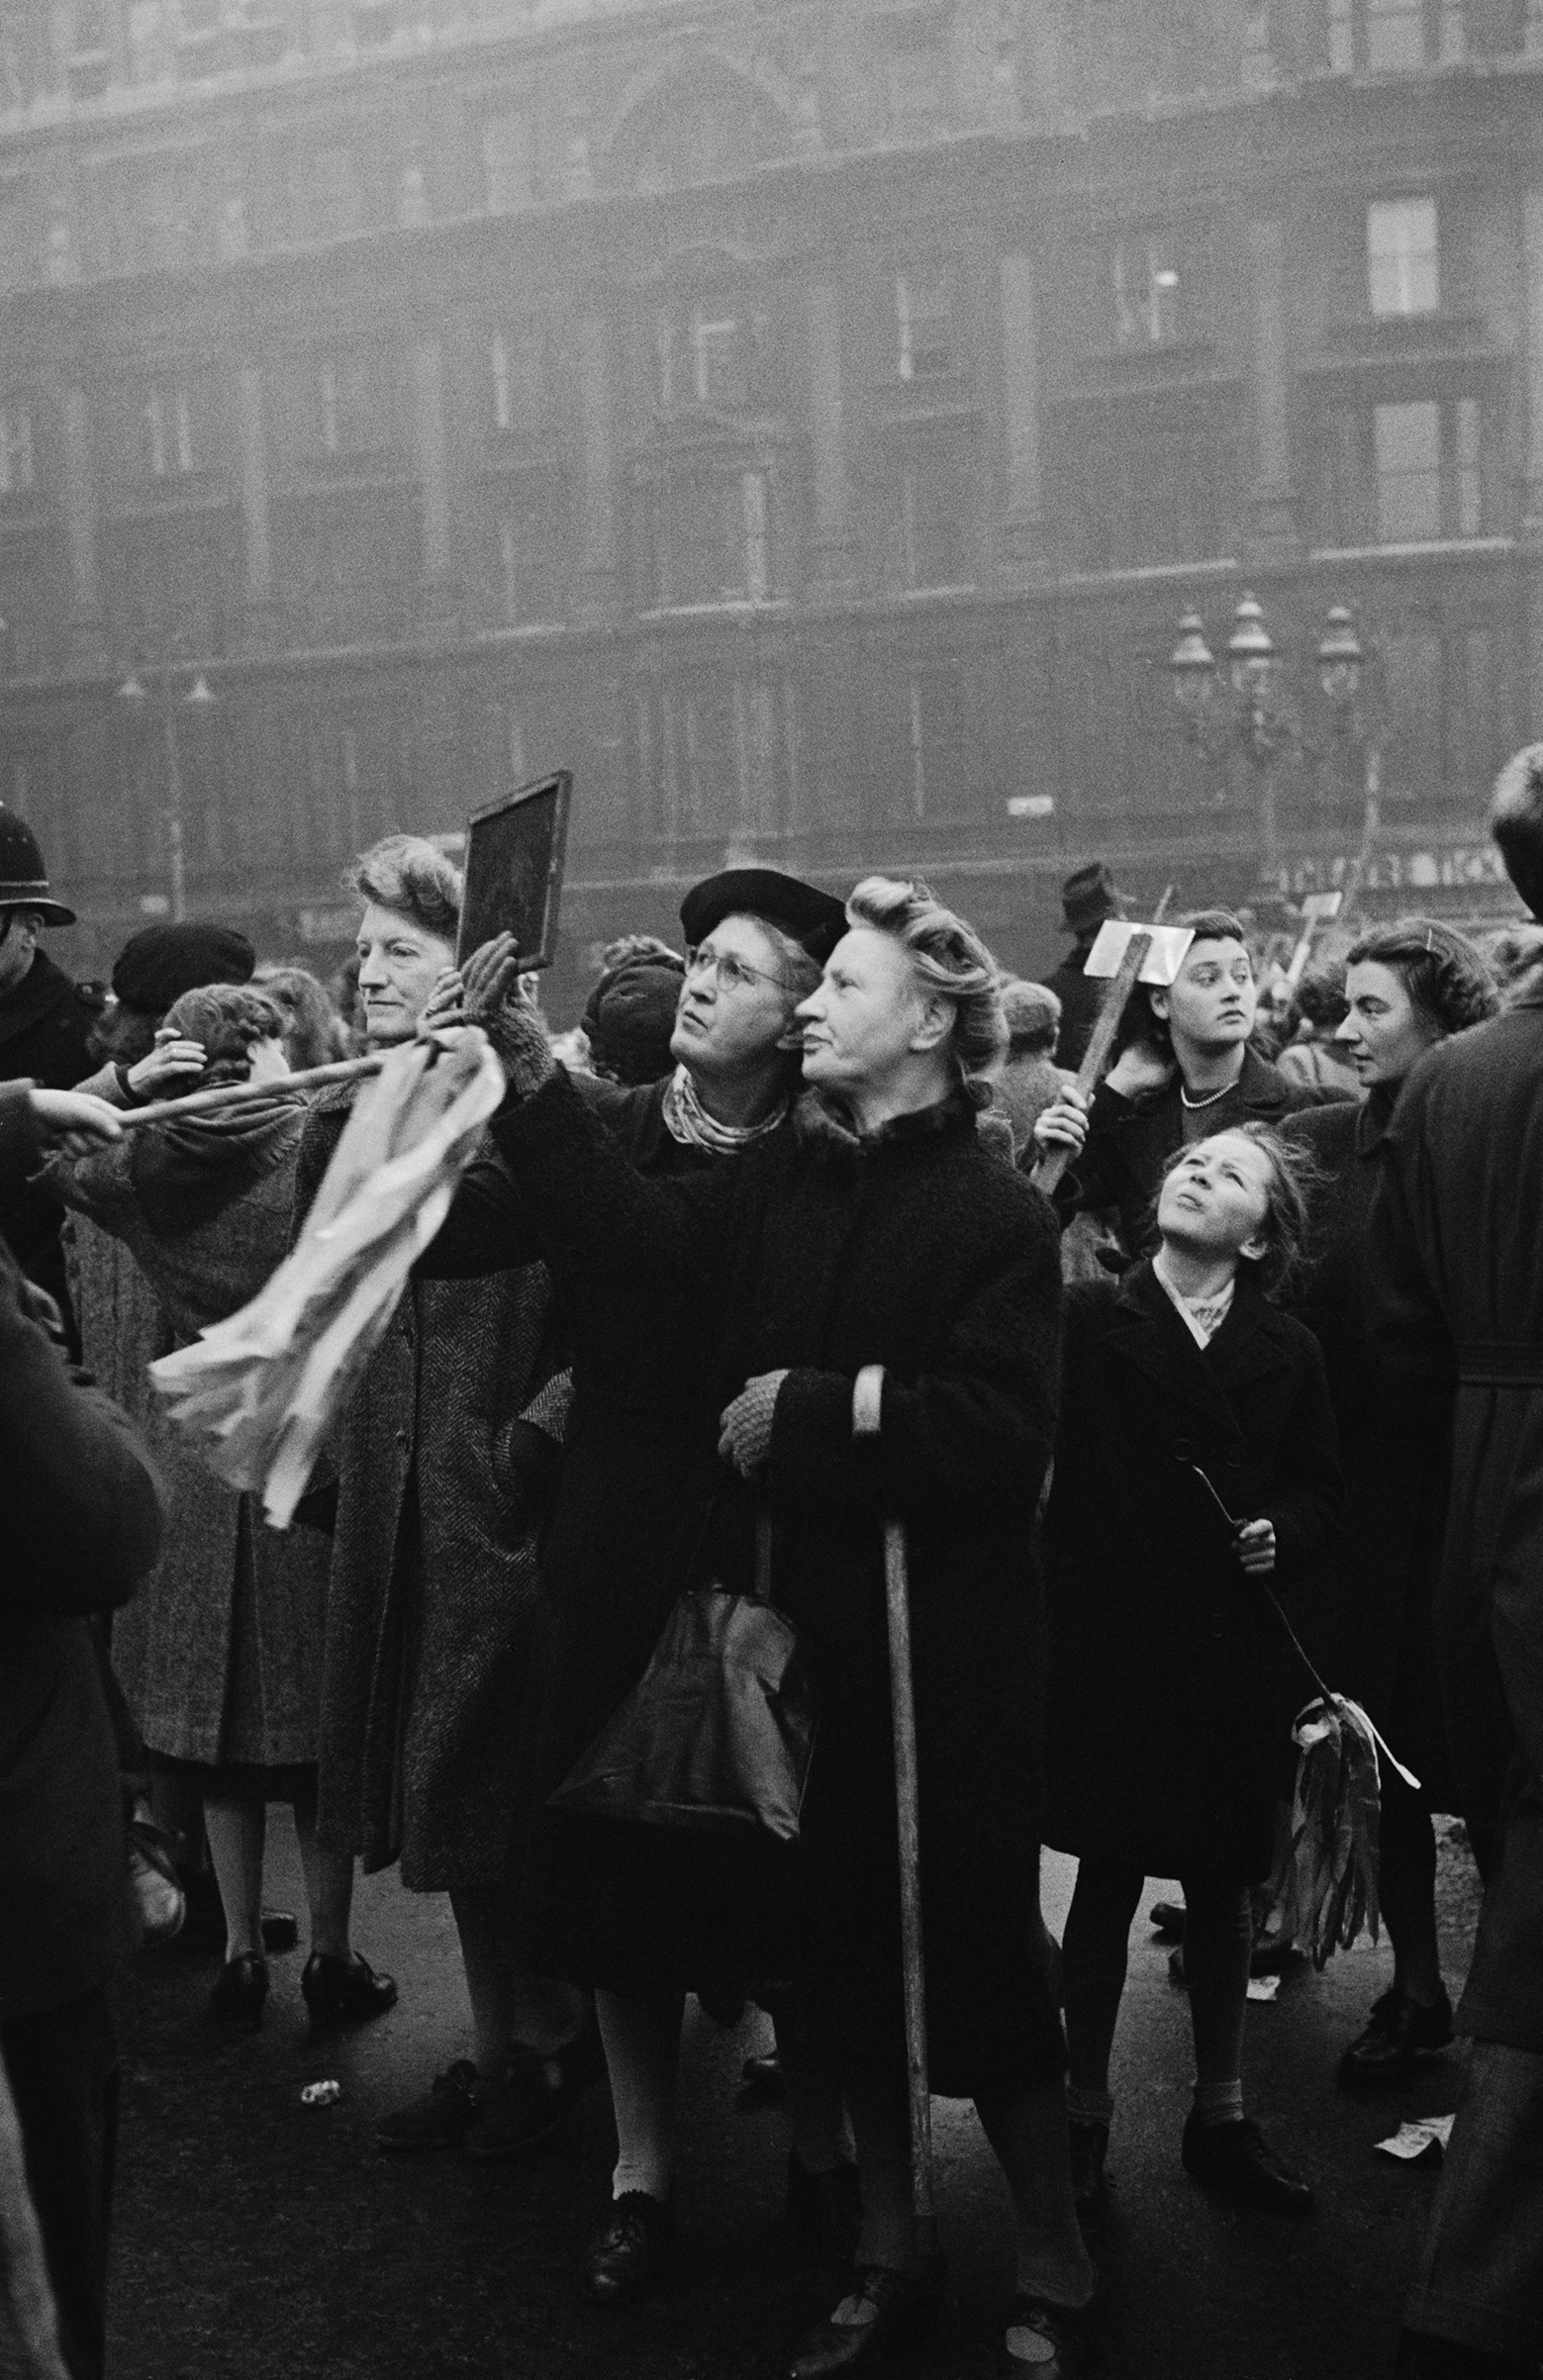 Spectators use hand-held mirrors to see over the crowd during the wedding of Queen Elizabeth II and Prince Philip, Duke of Edinburgh, at Westminster Abbey in London, Nov. 20, 1947.